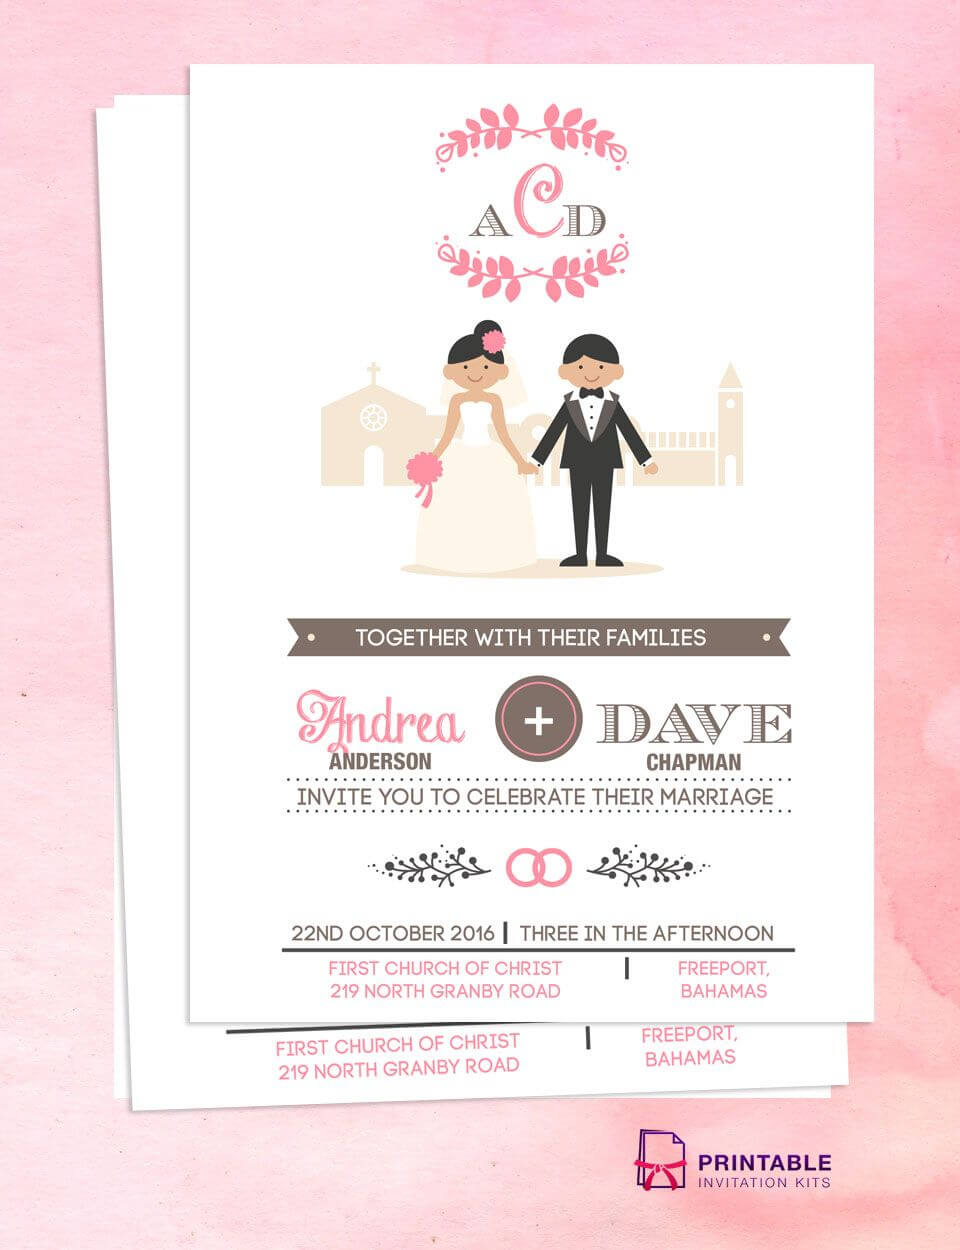 Illustrated Couple In Front Of Church Wedding Invitation Inside Church Wedding Invitation Card Template